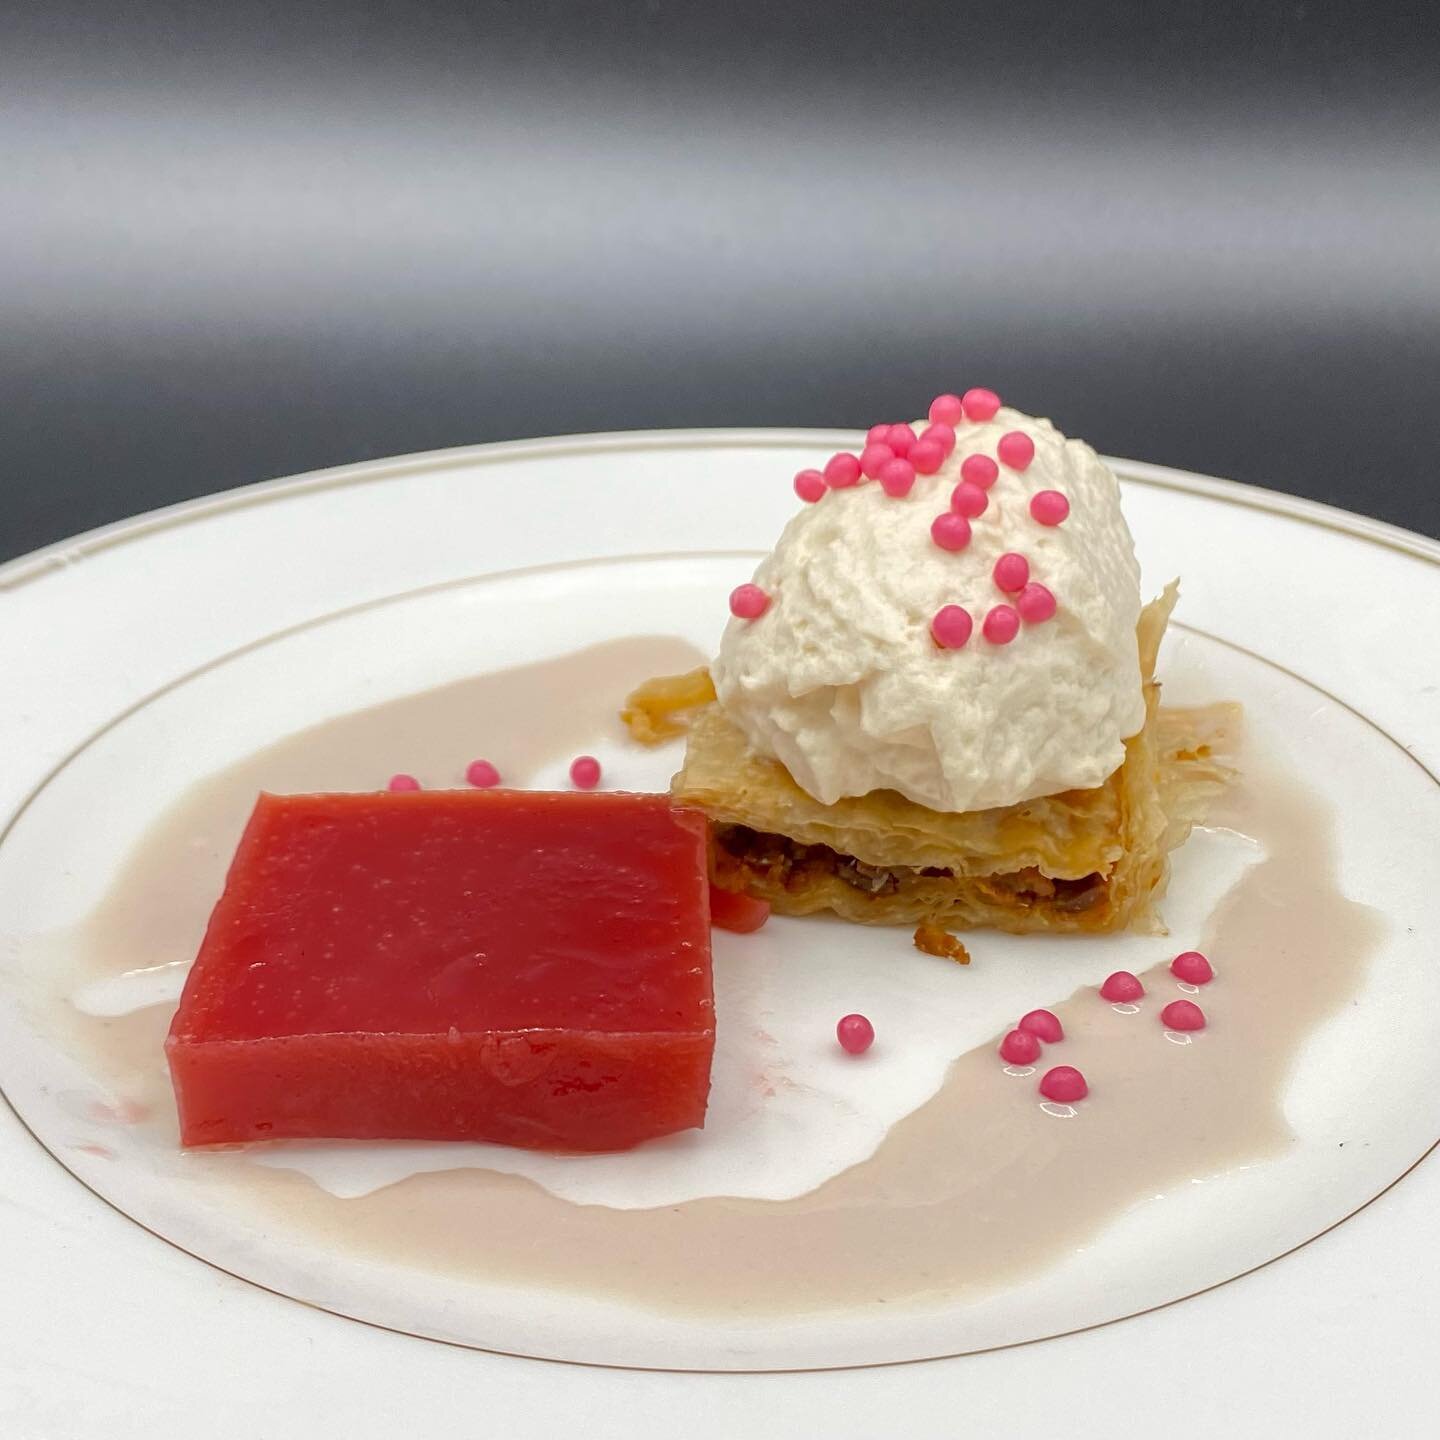 There isn&rsquo;t a better way to end your week than with our Strawberry Turkish Delight &mdash; Featuring house-made pistachio baklava, whipped blond chocolate ganache, and orange blossom-strawberry halva cream. Oh, and some sprinkles &mdash; becaus